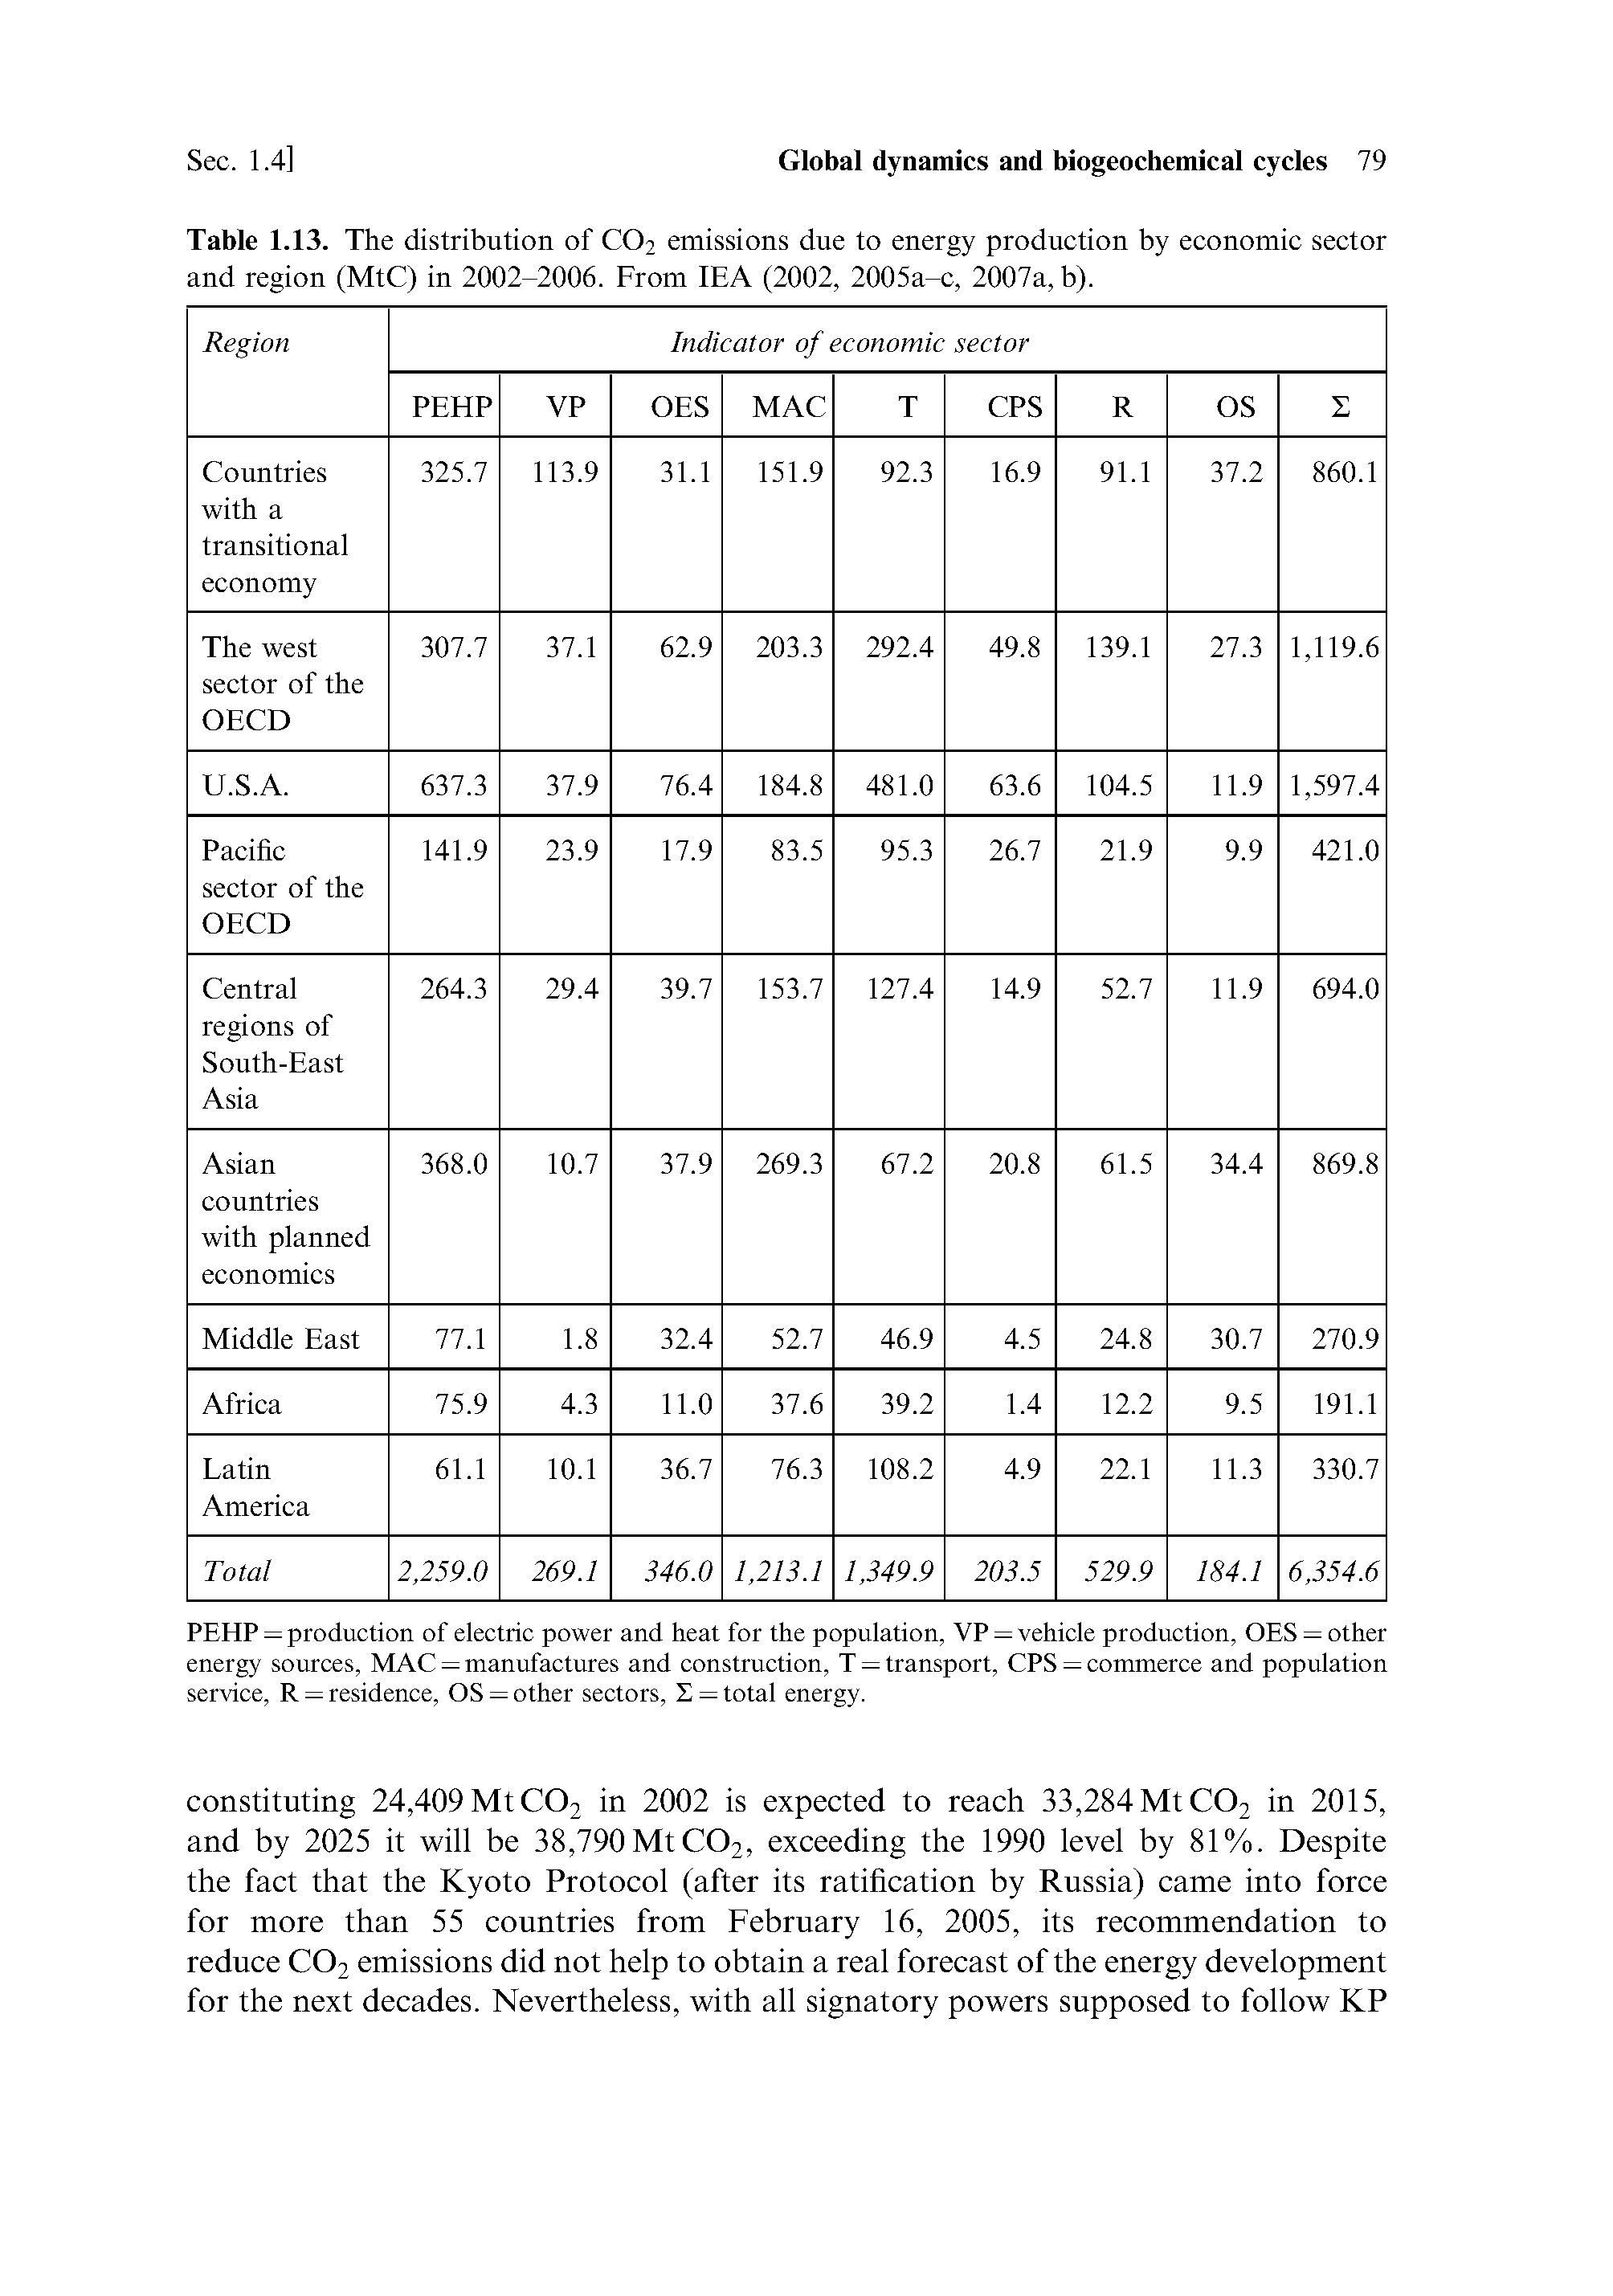 Table 1.13. The distribution of C02 emissions due to energy production by economic sector and region (MtC) in 2002-2006. From IEA (2002, 2005a-c, 2007a, b).